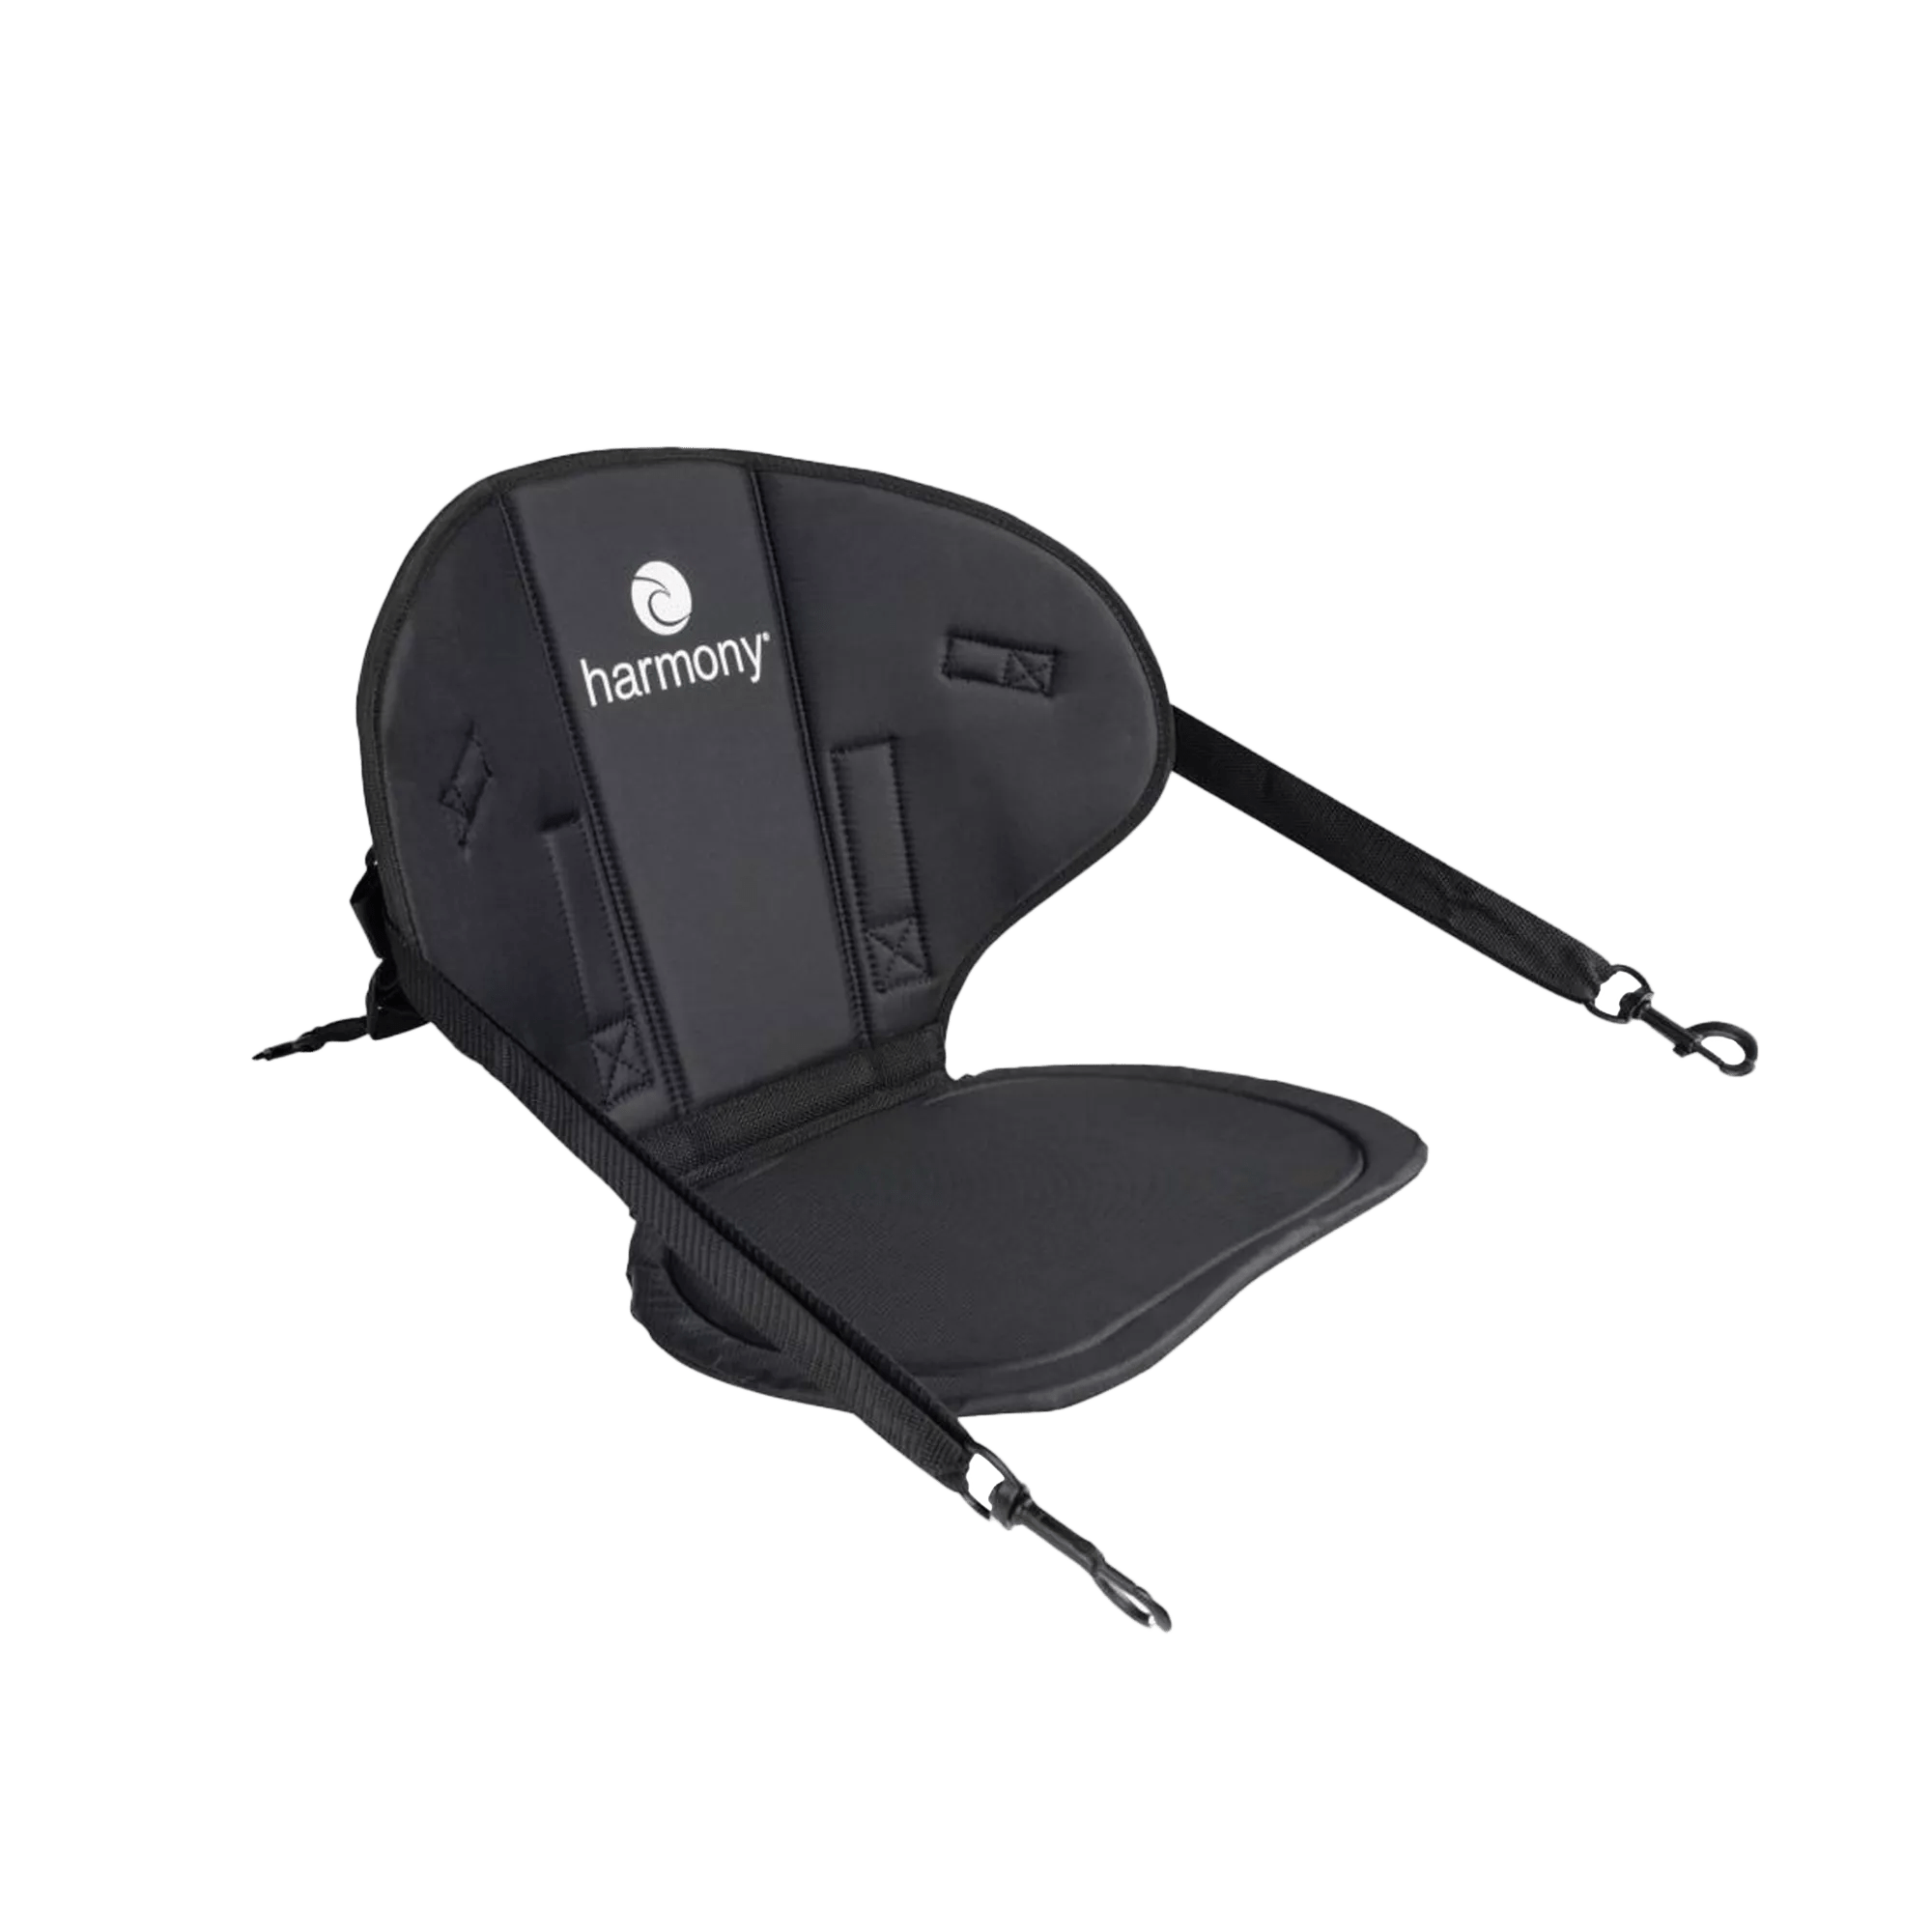 PERCEPTION - Standard Sit-On-Top Seat By Harmony Gear -  - 8023777 - ISO